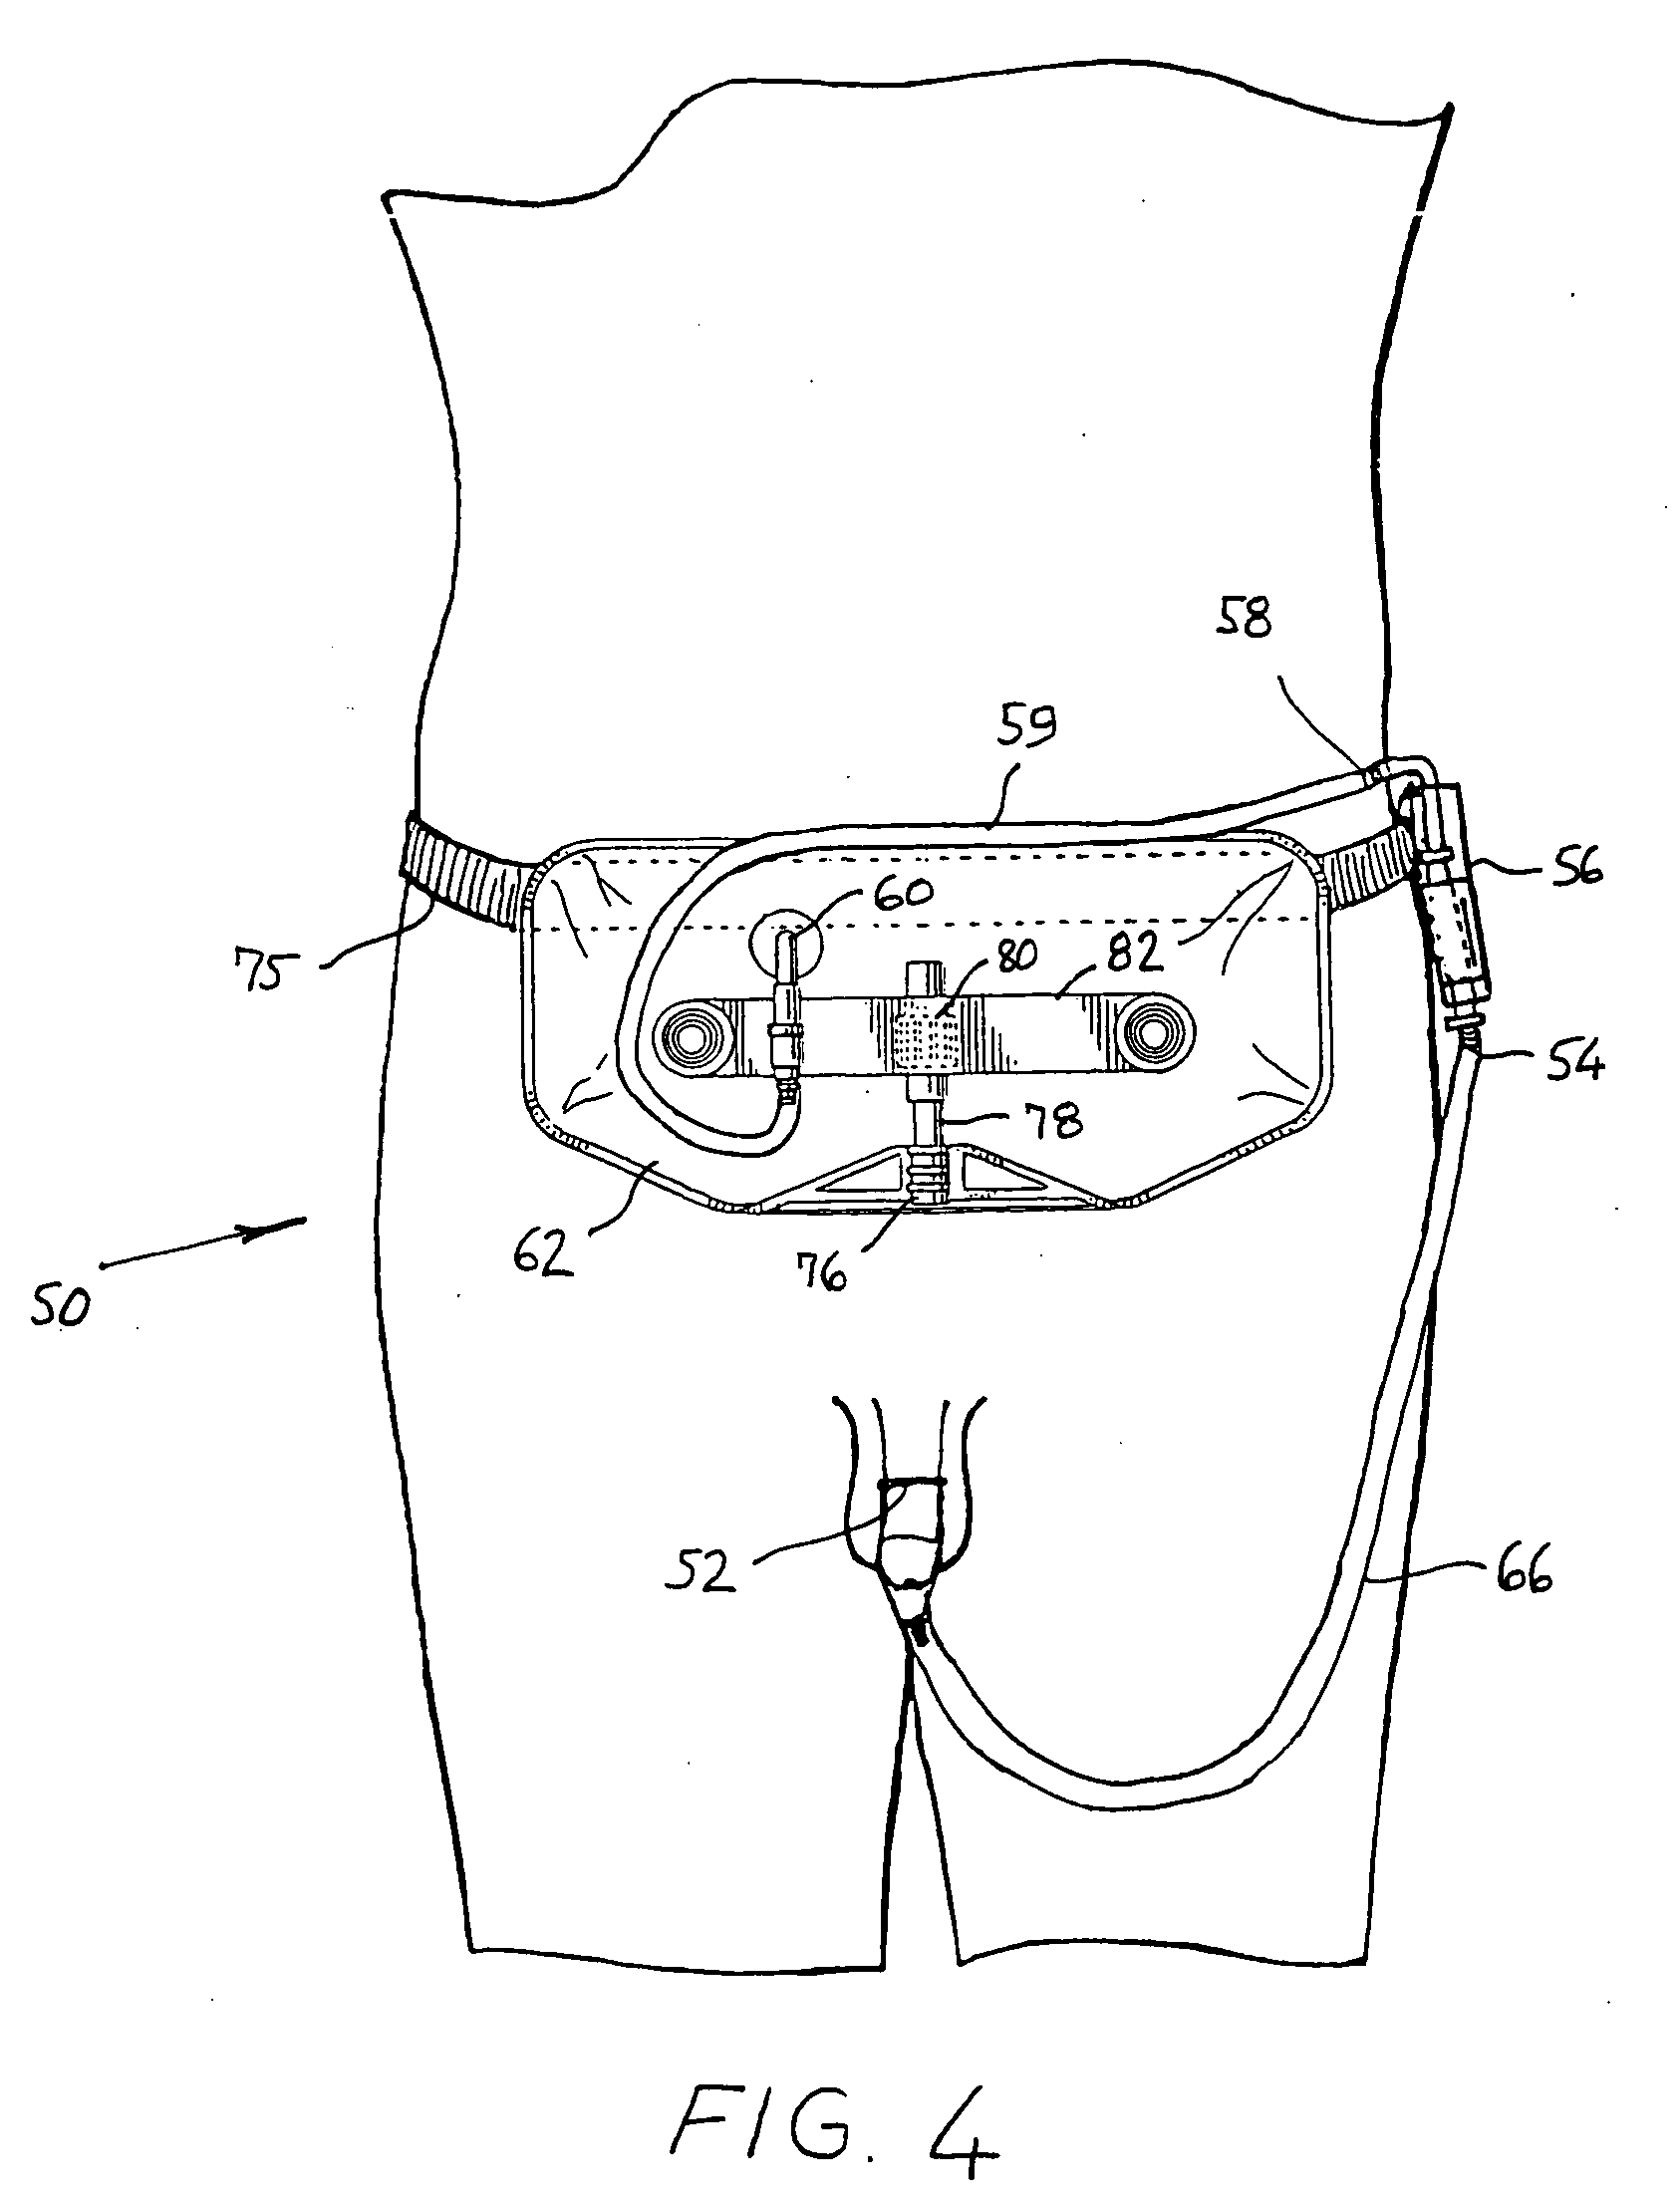 Urine pump for condom catheters and method for using